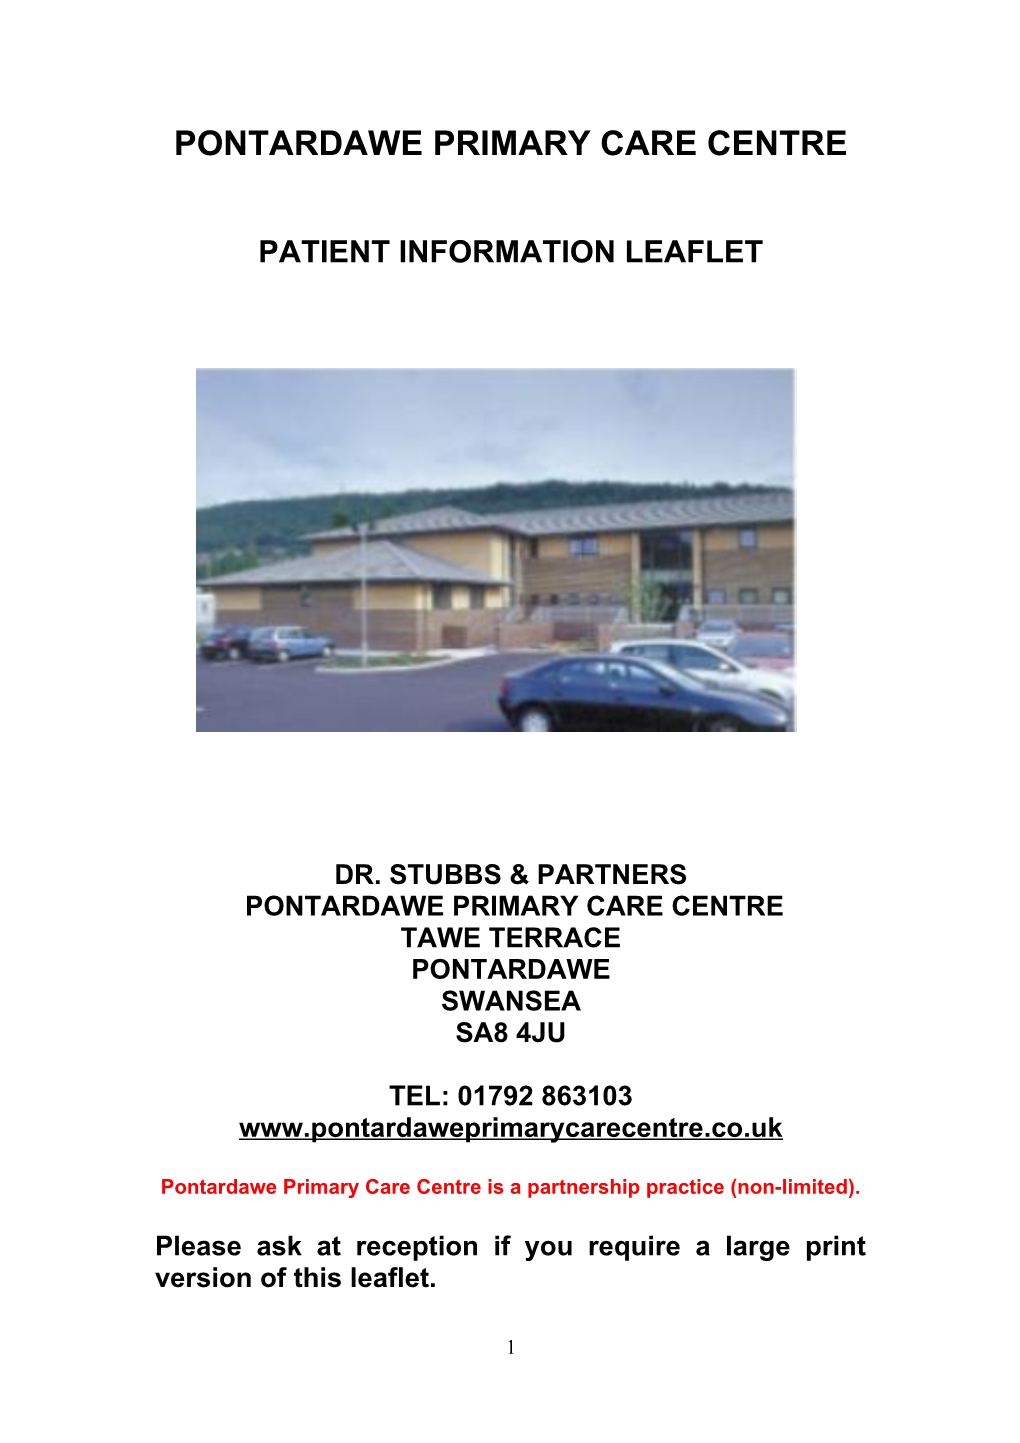 Download a Copy of Our Practice Leaflet